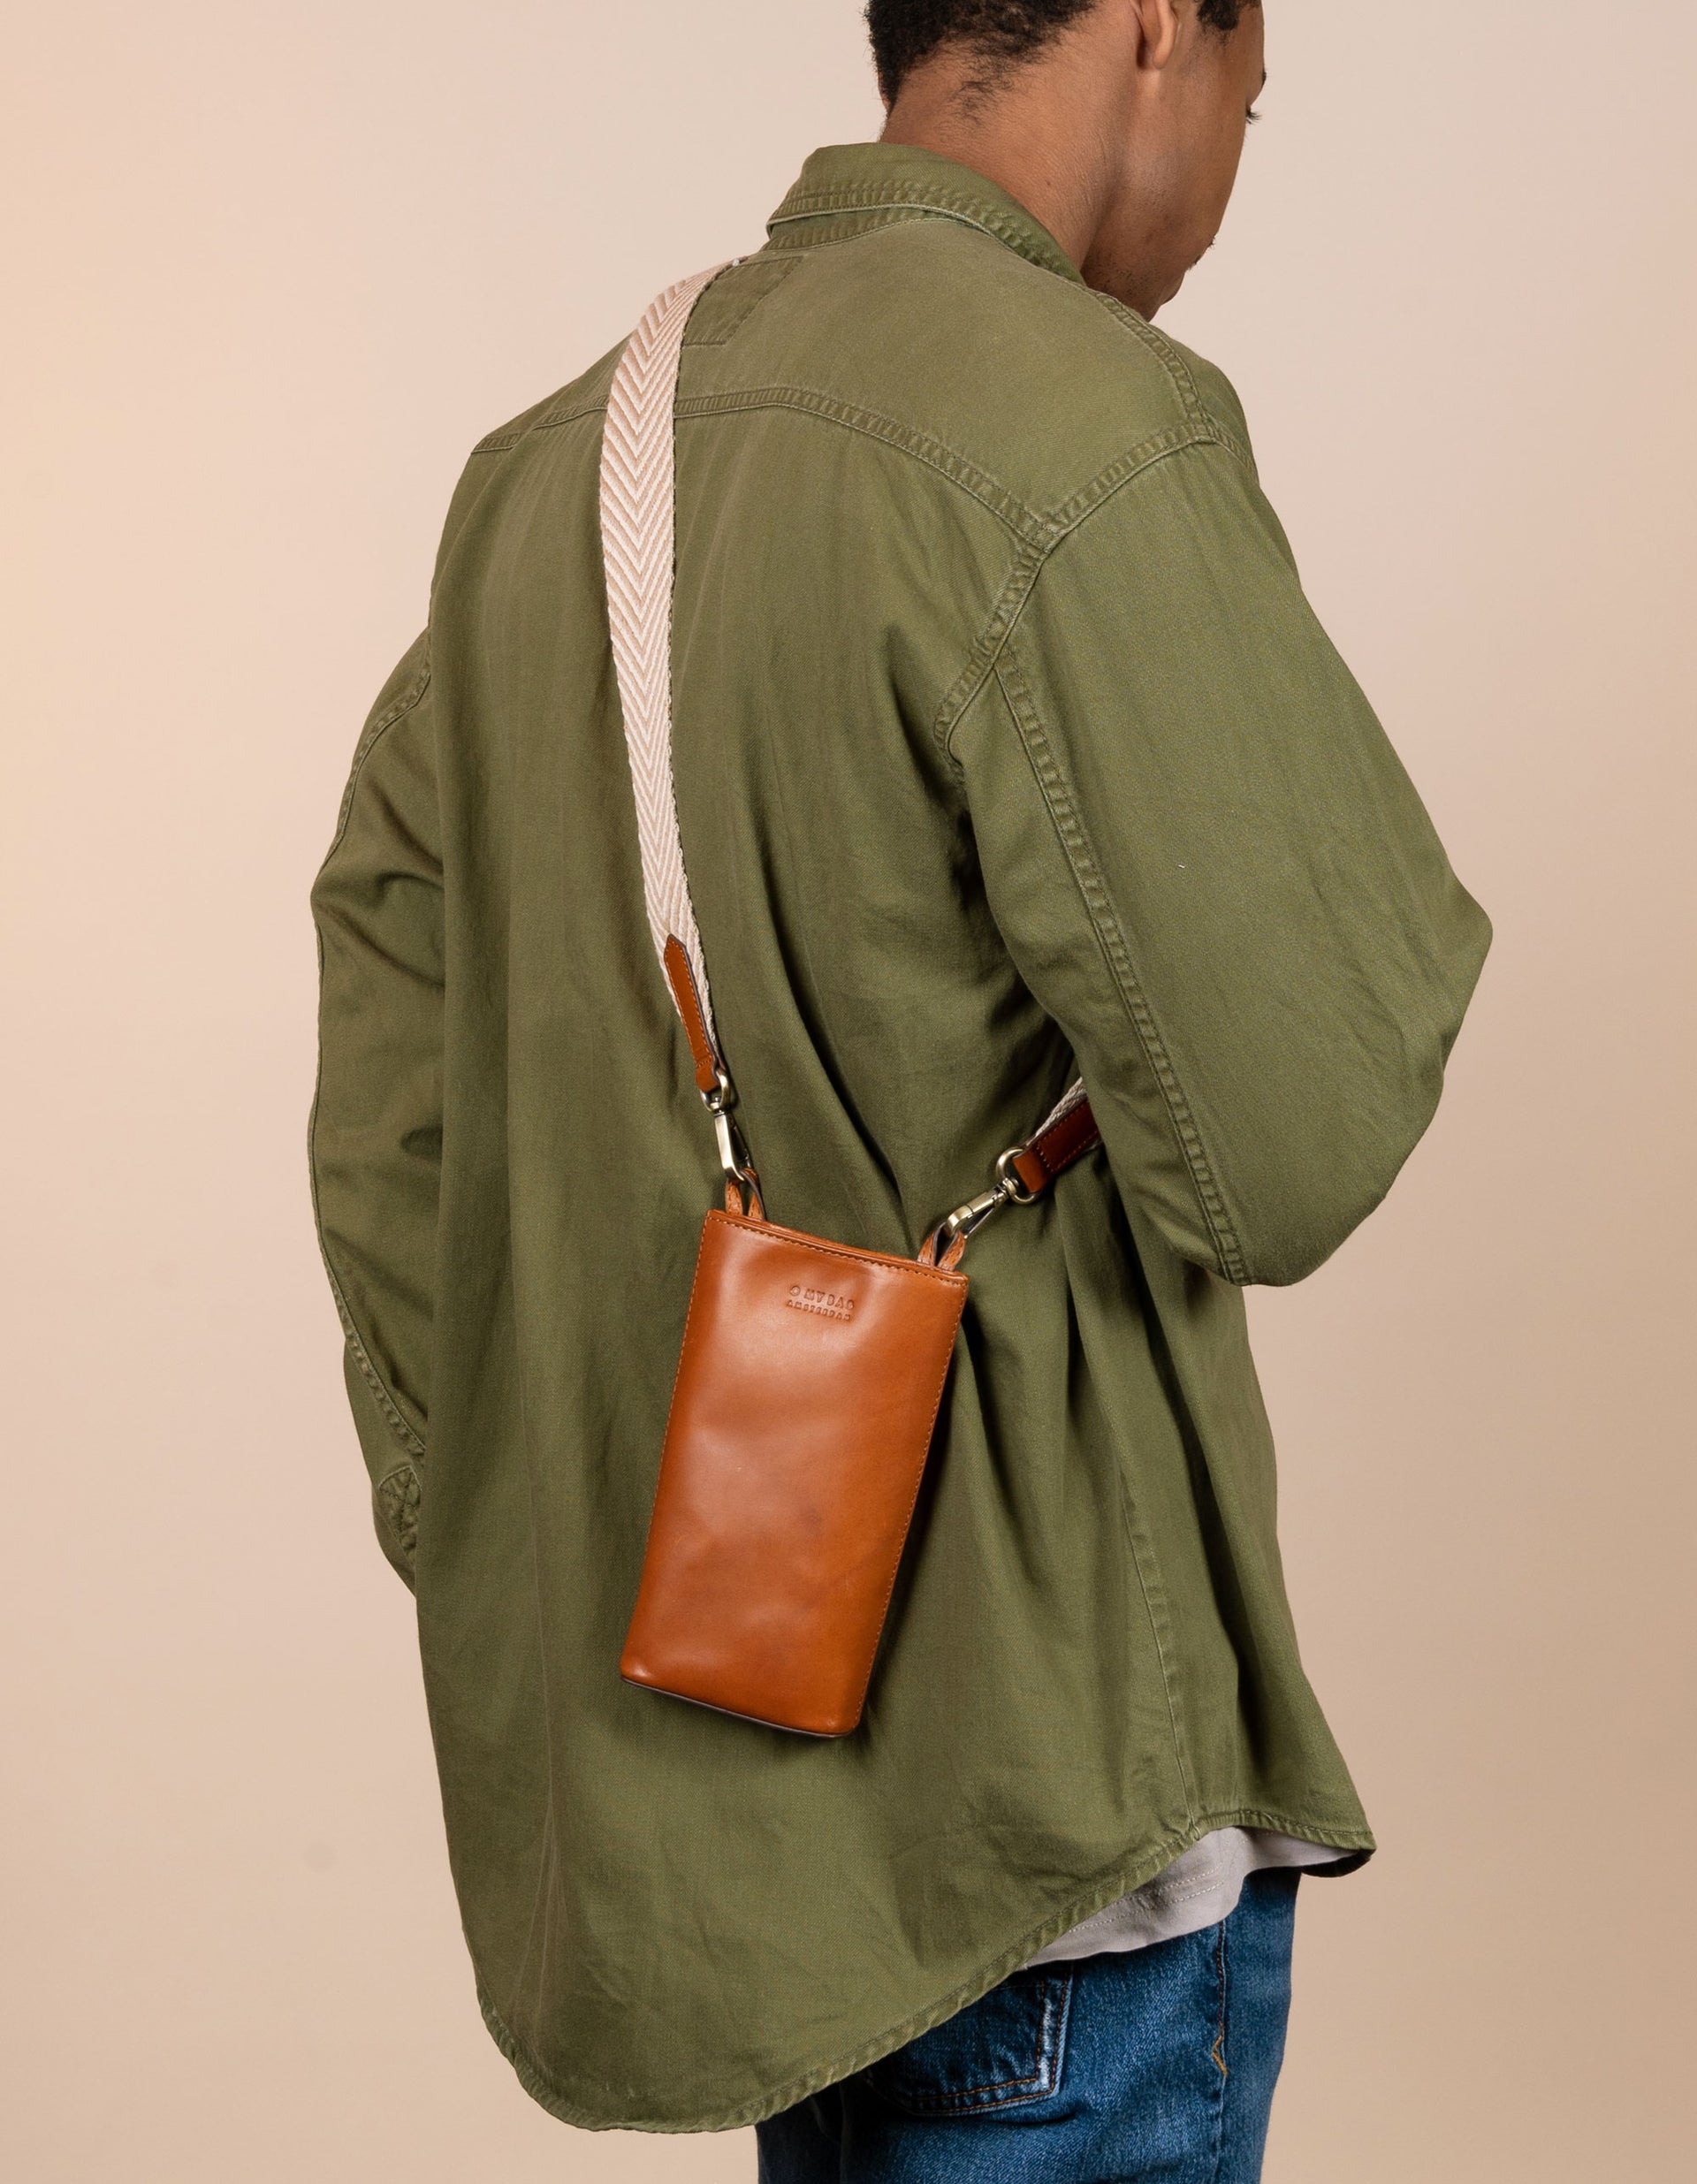 Charlie phone bag - cognac classic leather - male model back product image with organic cotton webbing strap